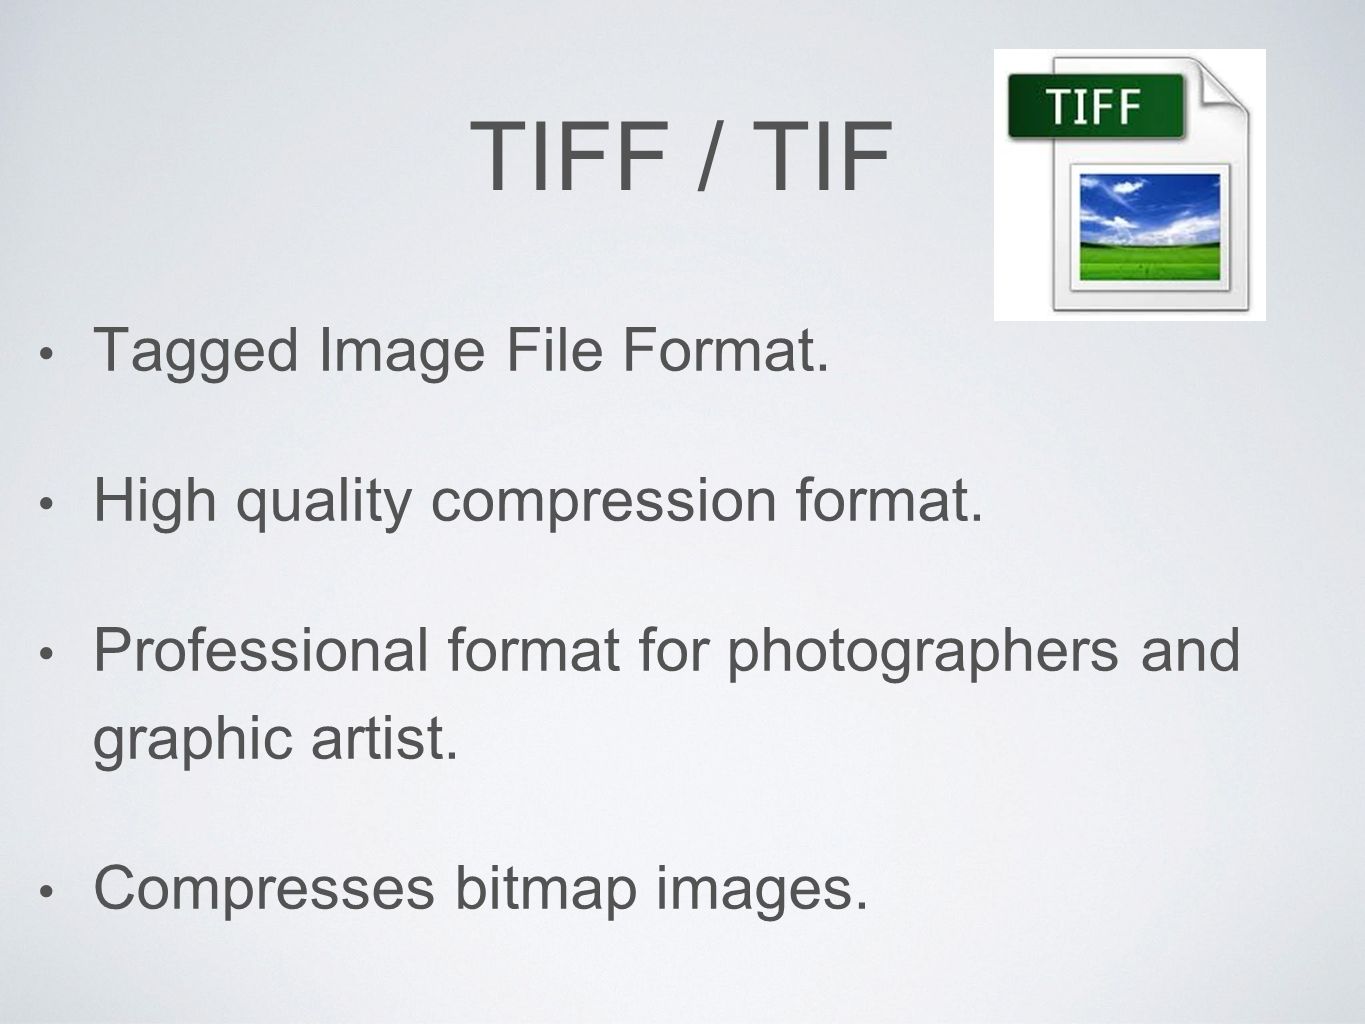 TIFF / TIF Tagged Image File Format. High quality compression format.